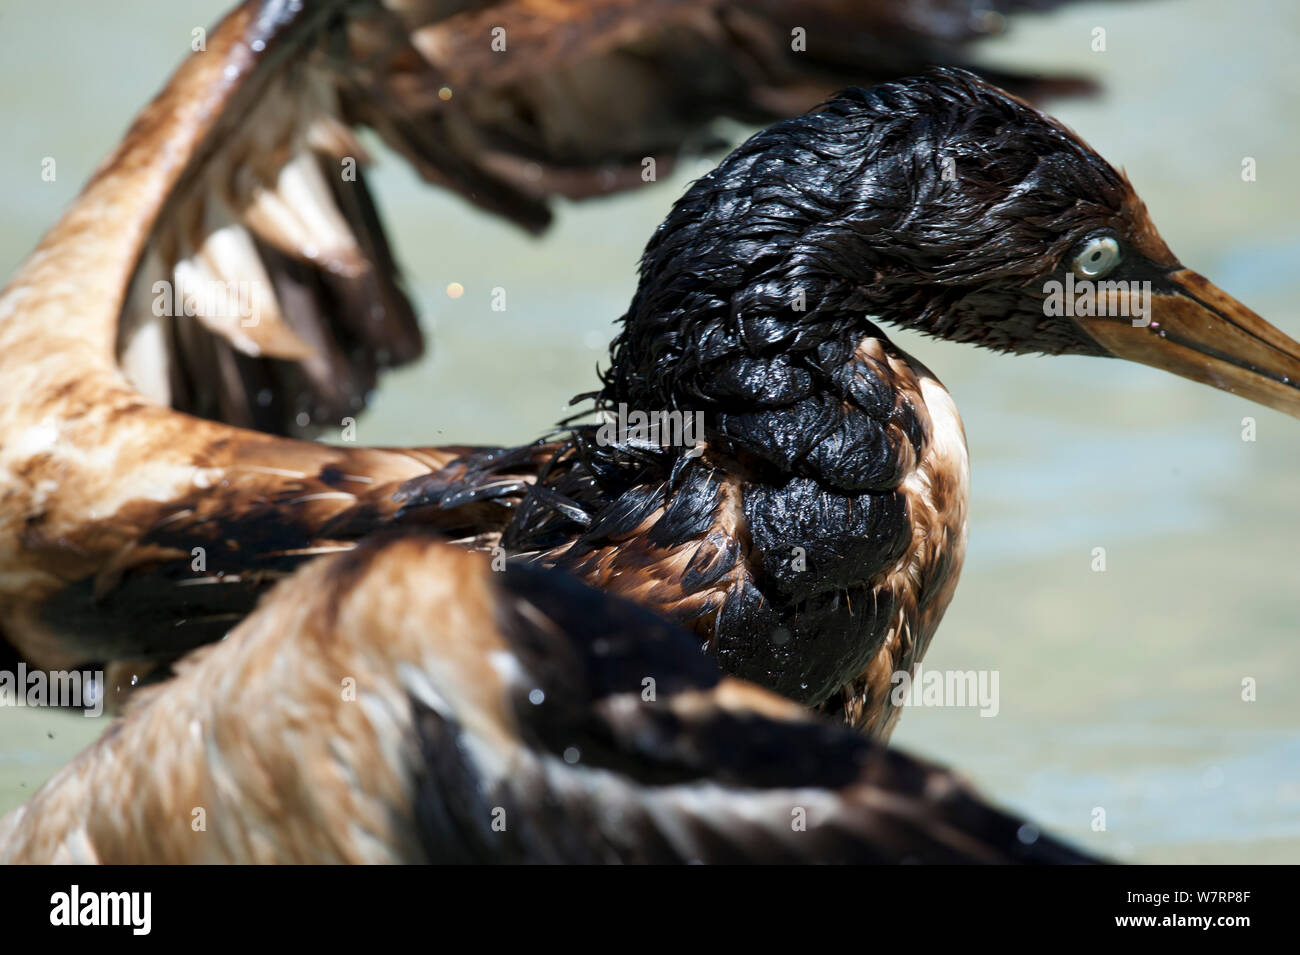 Cape gannet (Morus capensis) covered in oil in SANCCOB pool, during rehabilitation at the Southern African Foundation for the Conservation of Coastal Birds (SANCCOB) South Africa, November 2011 Stock Photo